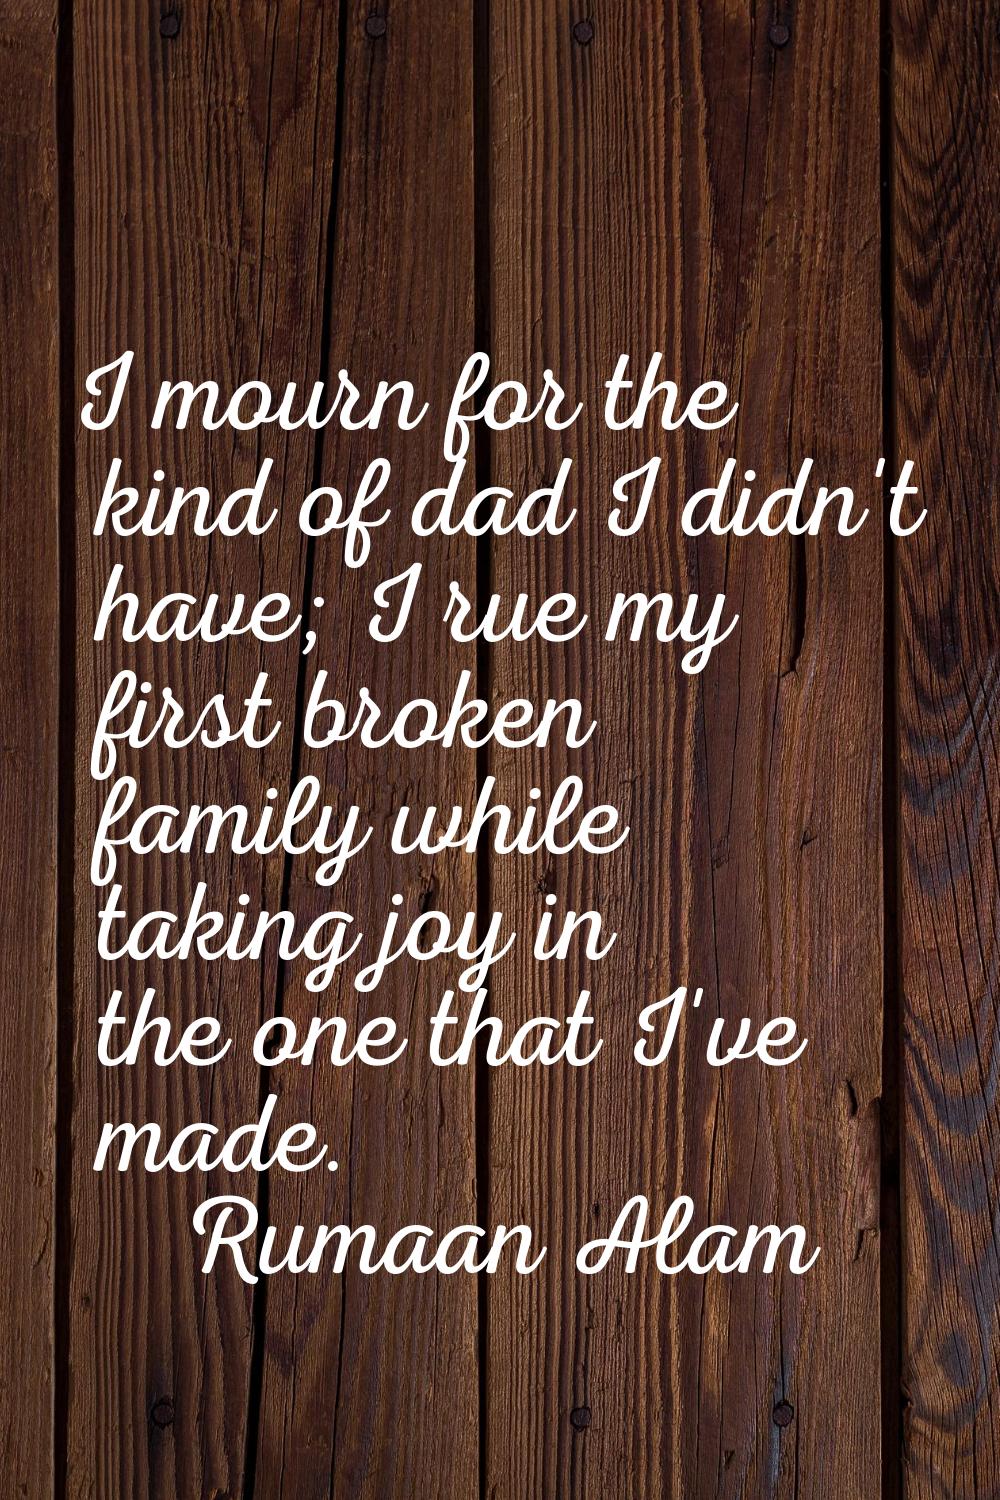 I mourn for the kind of dad I didn't have; I rue my first broken family while taking joy in the one